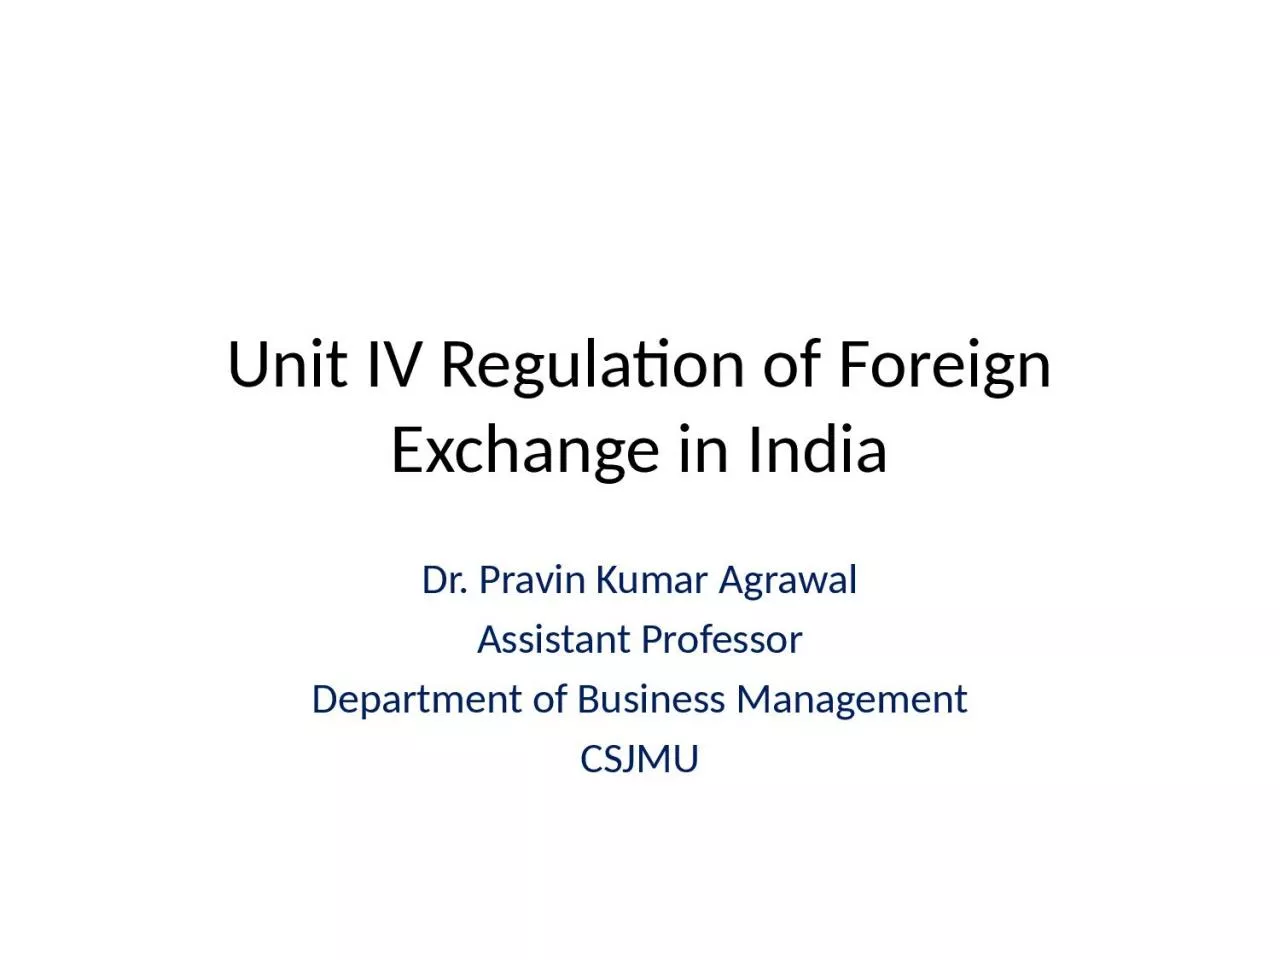 Unit IV Regulation  of Foreign Exchange in India